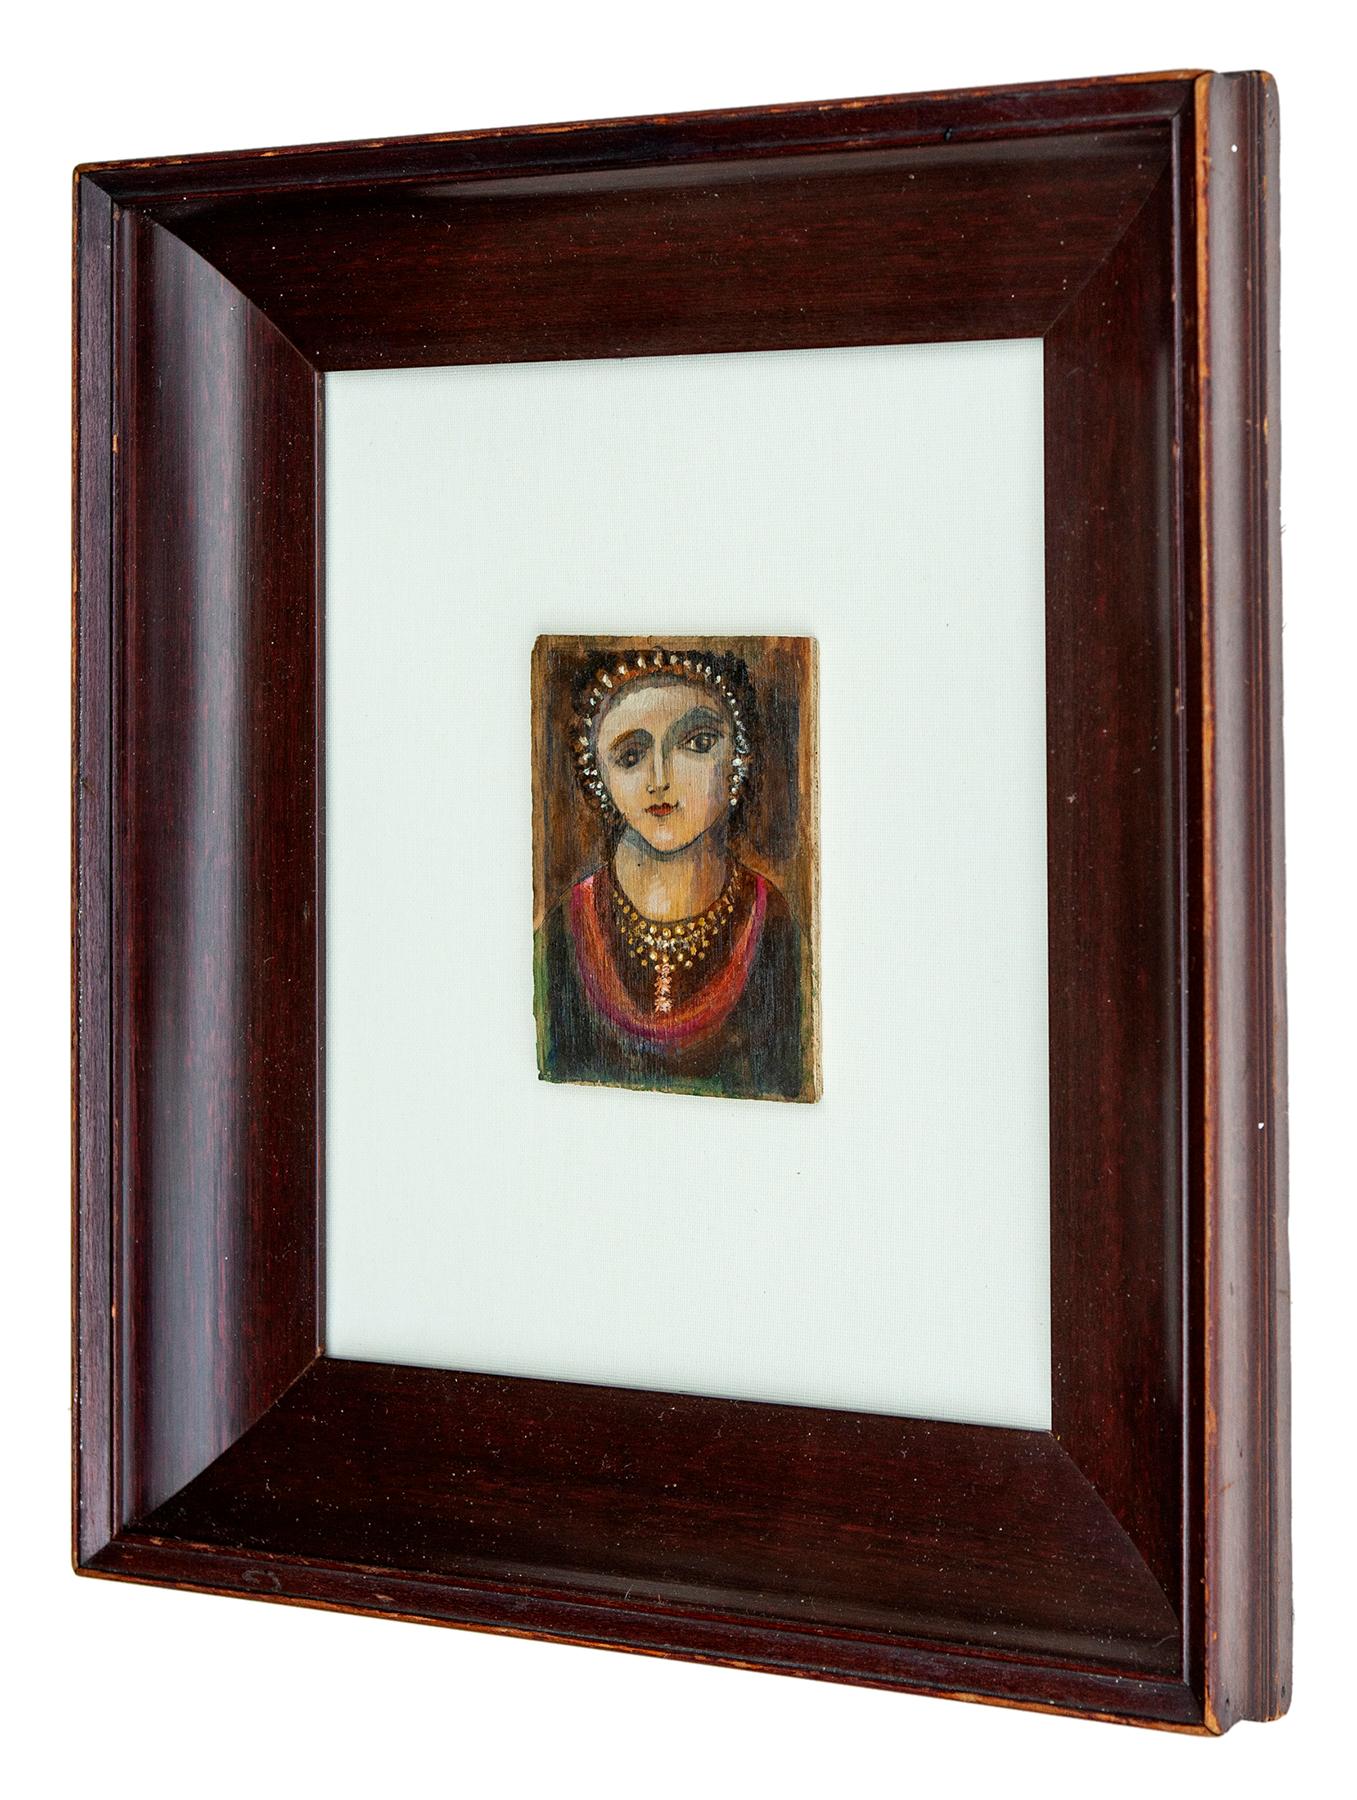 American Empire Shadow Box Frame w/Small Image of a Woman For Sale